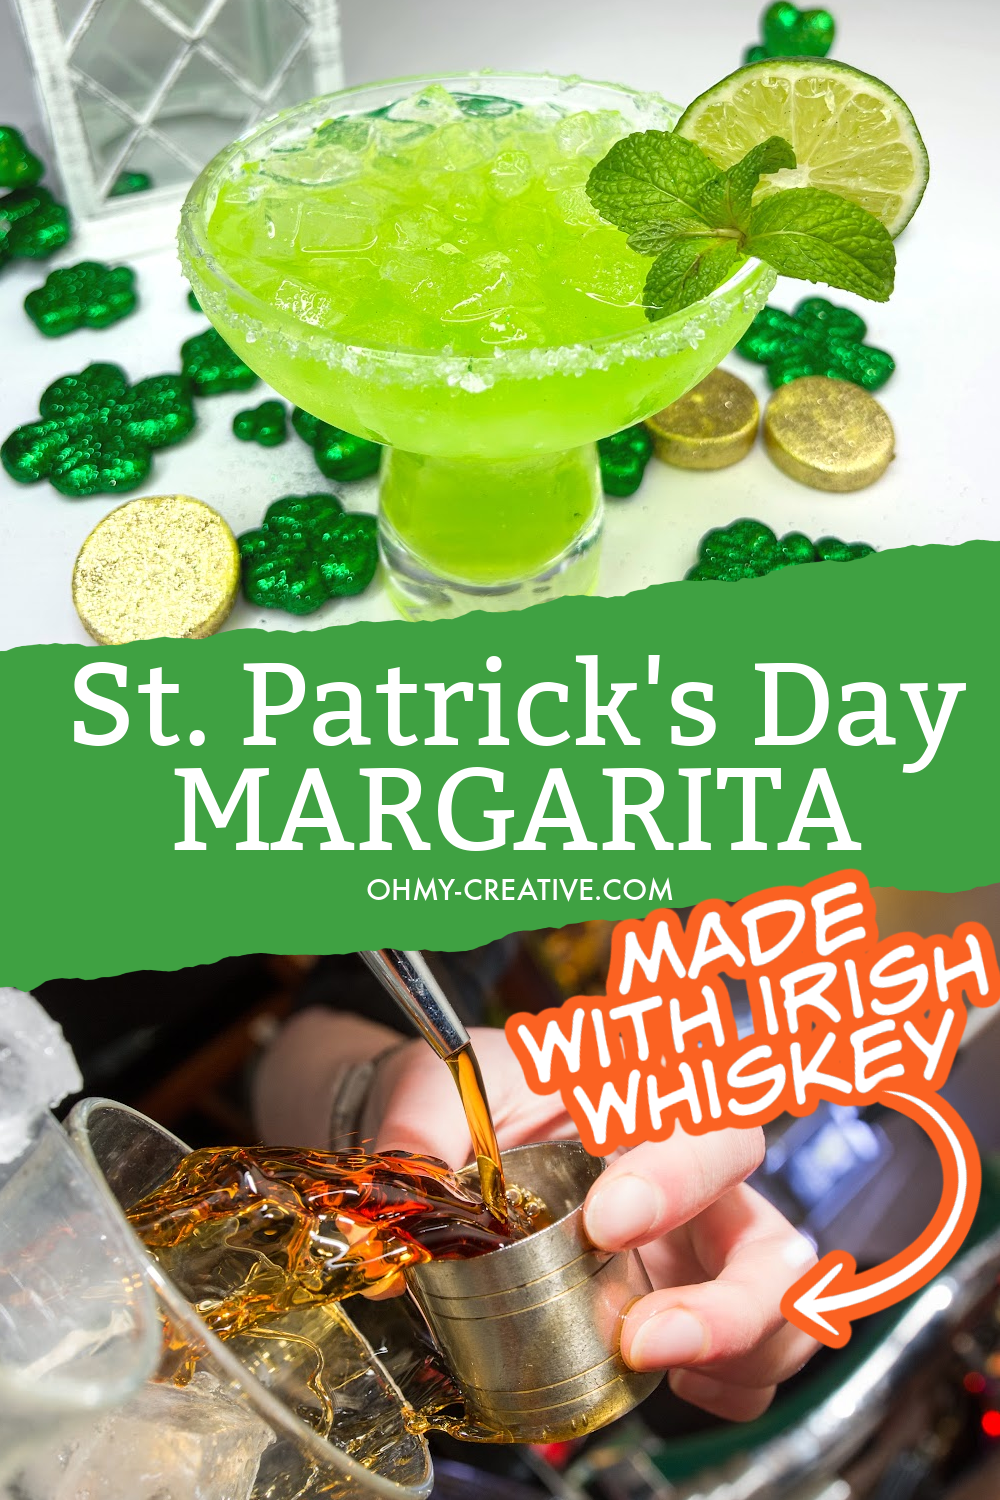 a green Irish margarita in a margarita glass garnished with a lime. In the background are shamrocks and gold pieces. Second image is a pouring of whiskey into a shot glass.